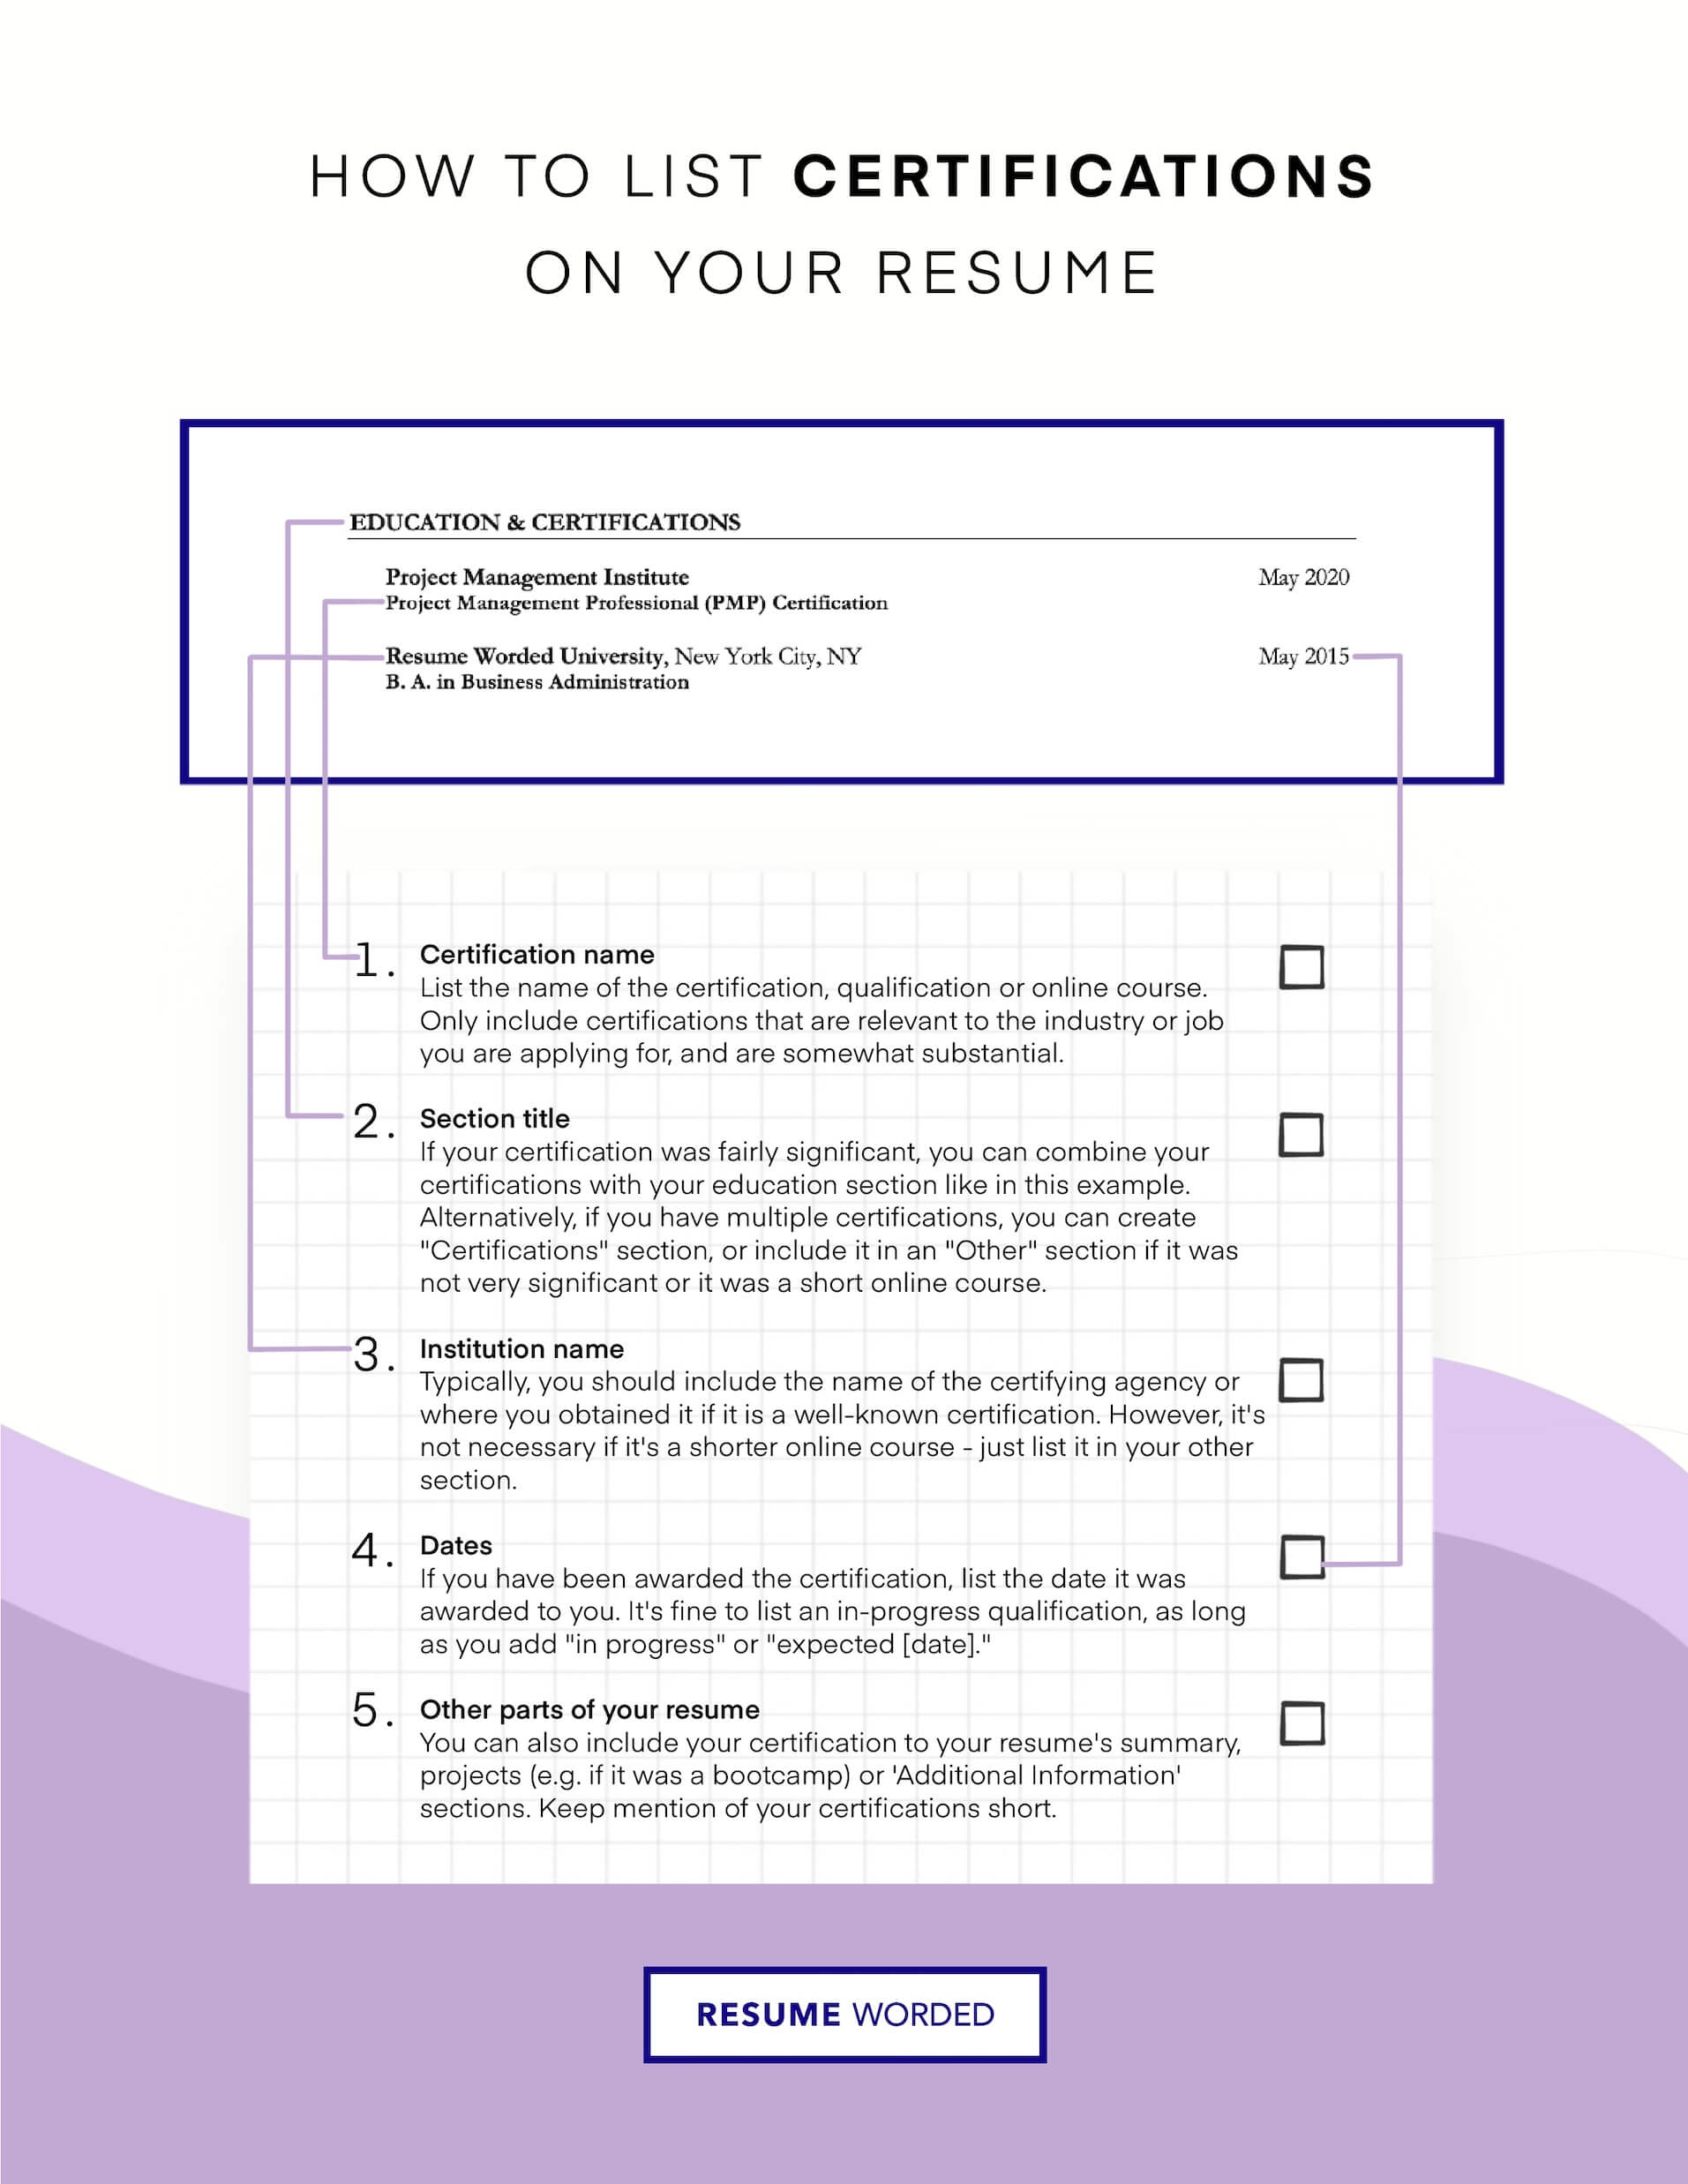 Include relevant certifications related to contracts or legal. - Contract Administrator Resume